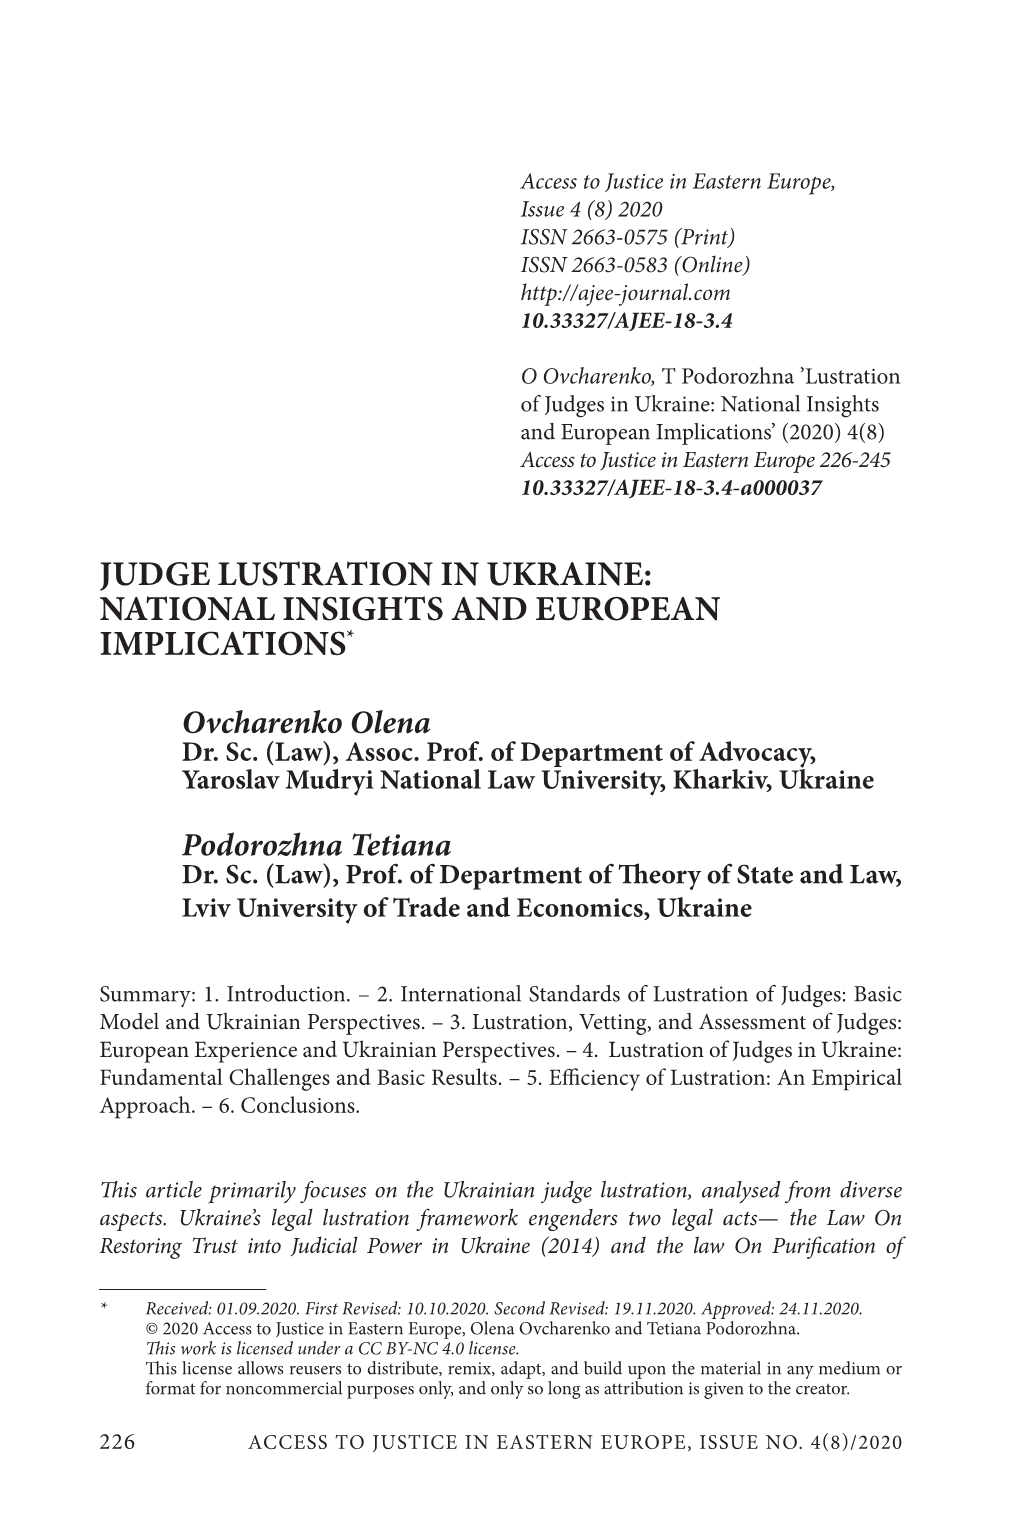 Judge Lustration in Ukraine: National Insights and European Implications*